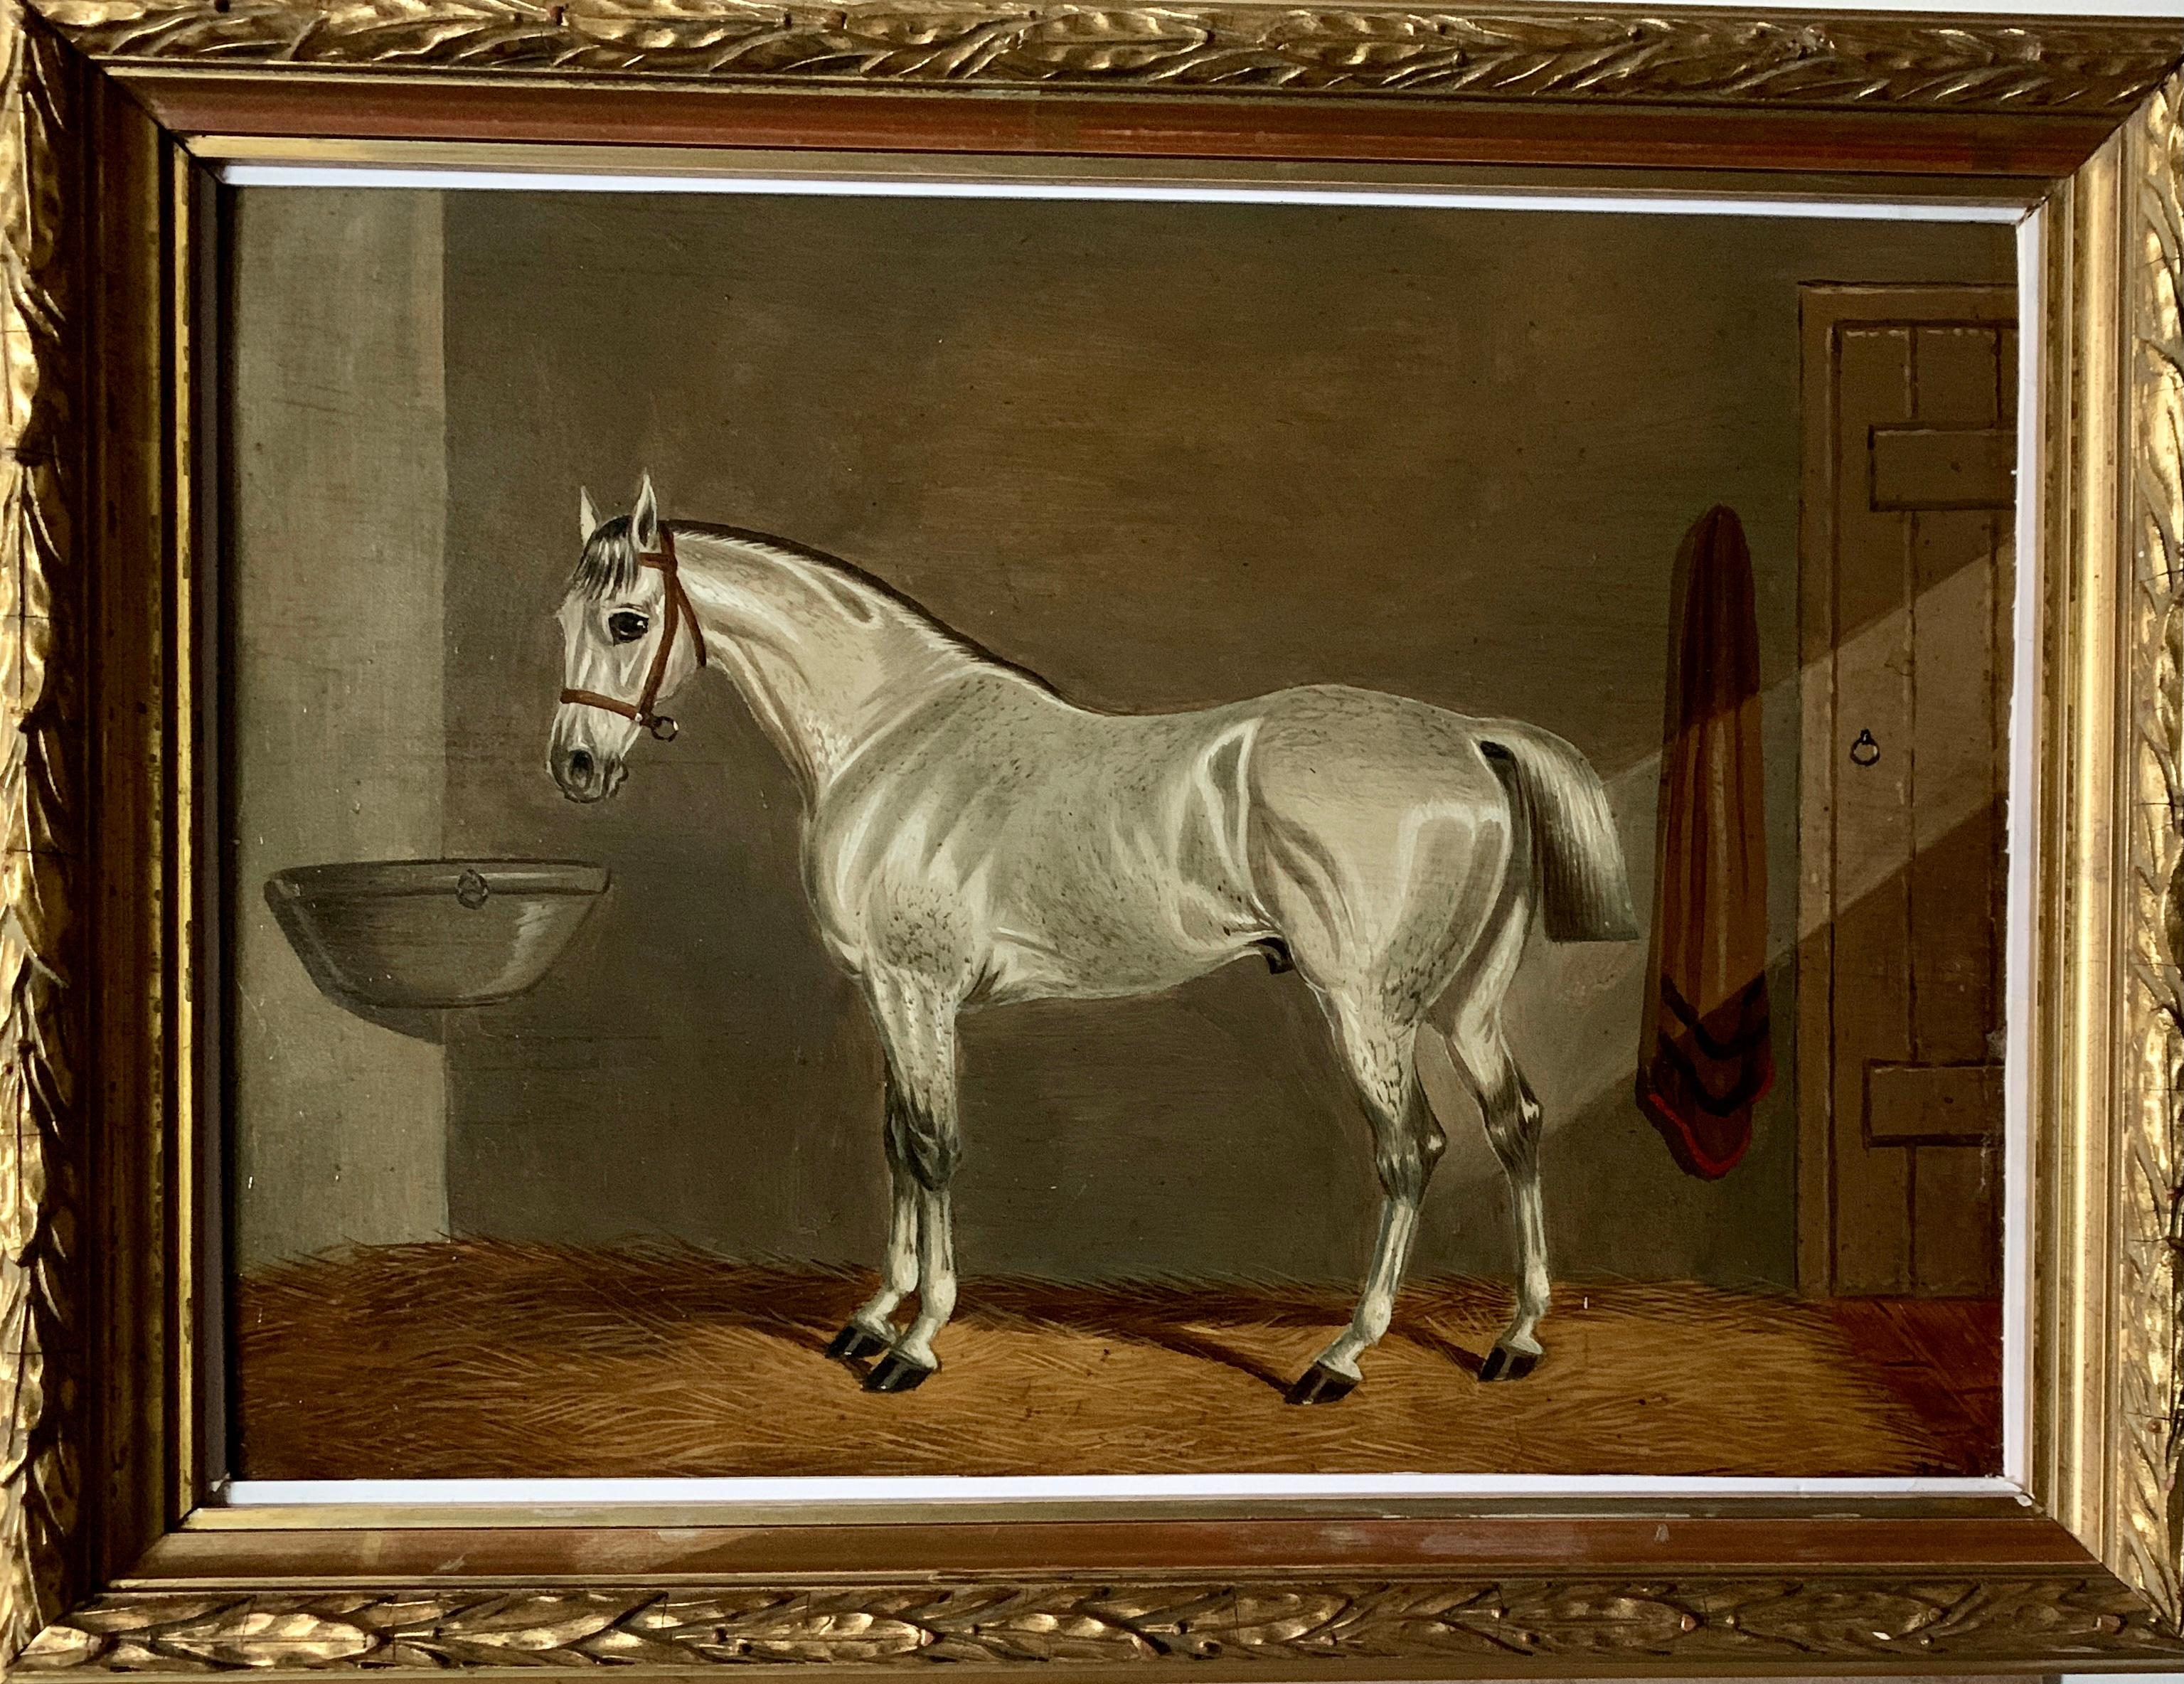 Edwin Loder Animal Painting - 19th century Antique Portrait of an English Gray Horse in a stable in oils.